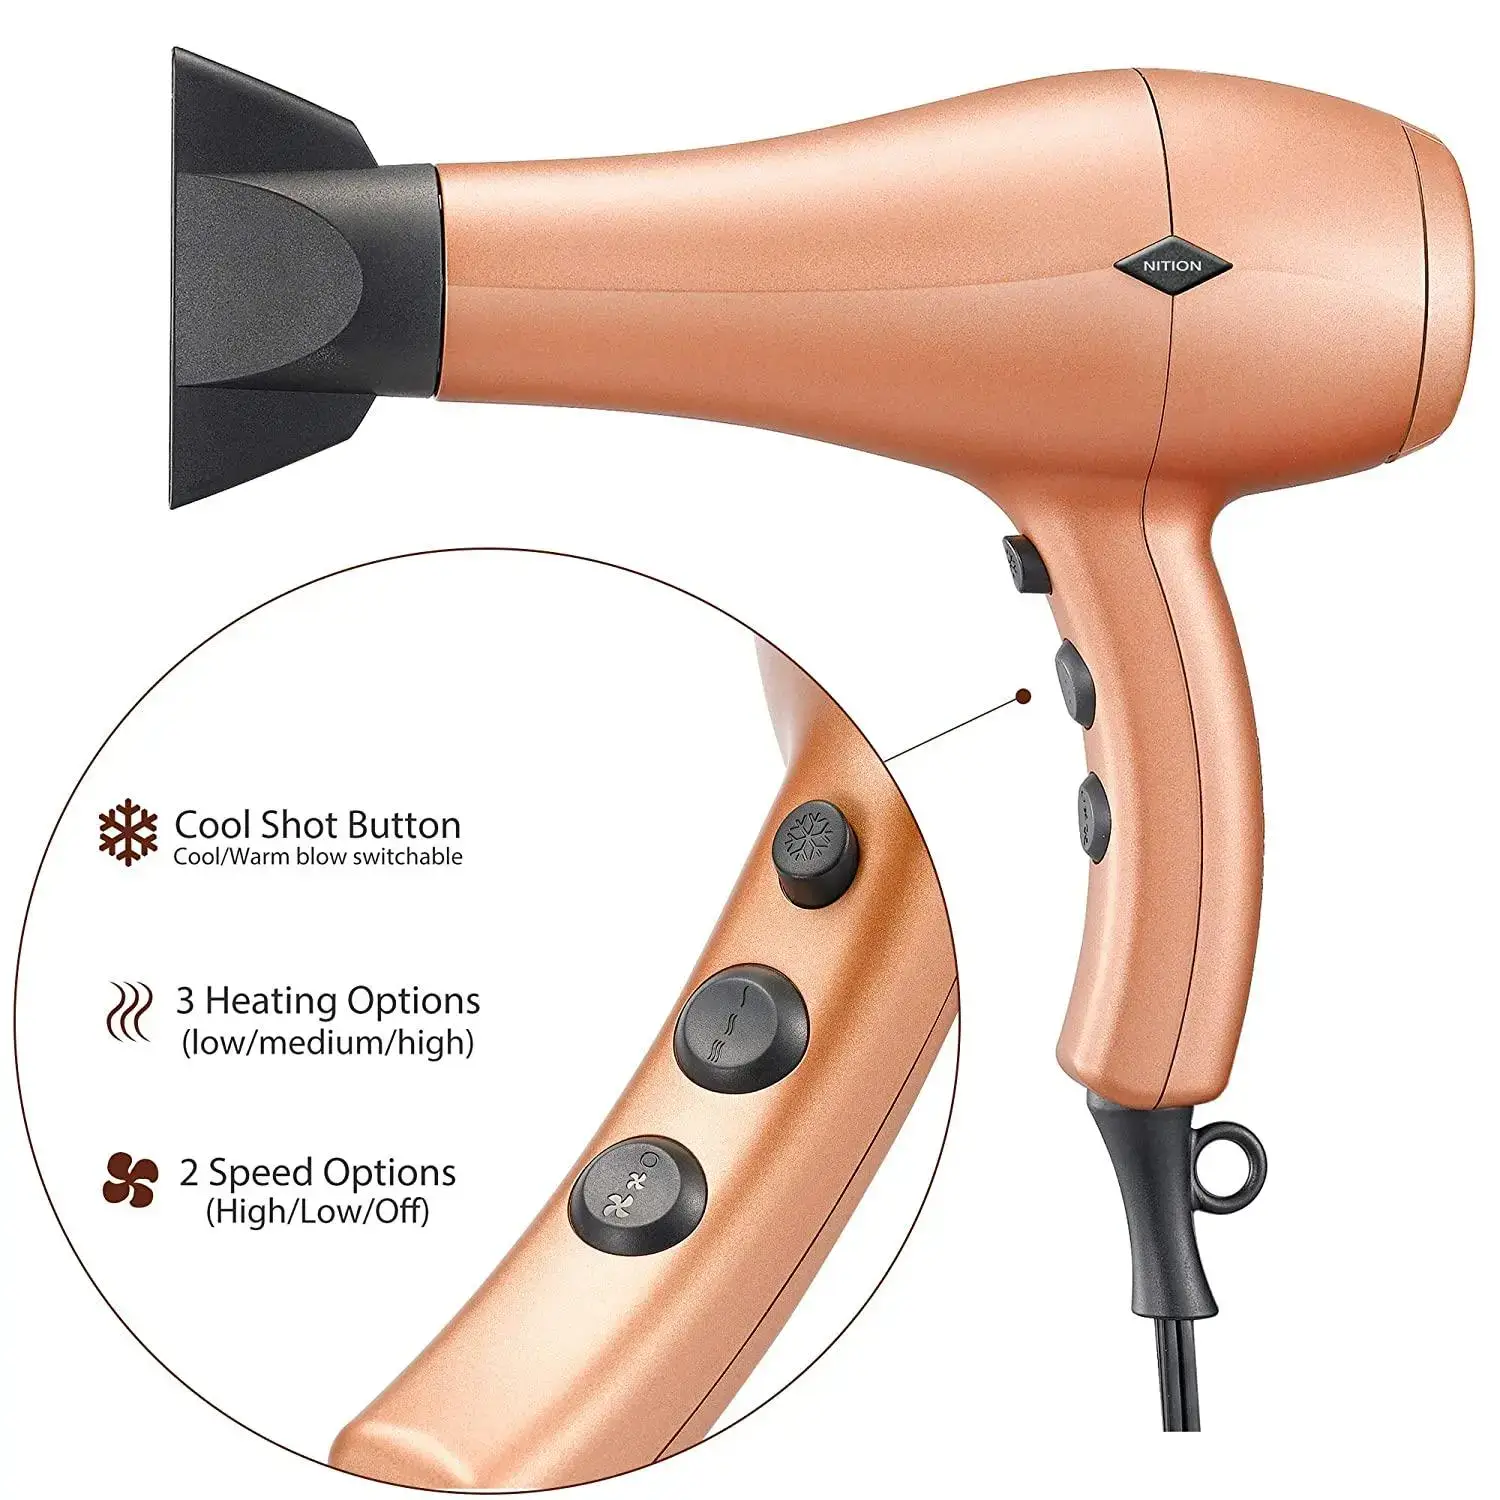 Copper hair dryer with nozzle and control buttons highlighted.